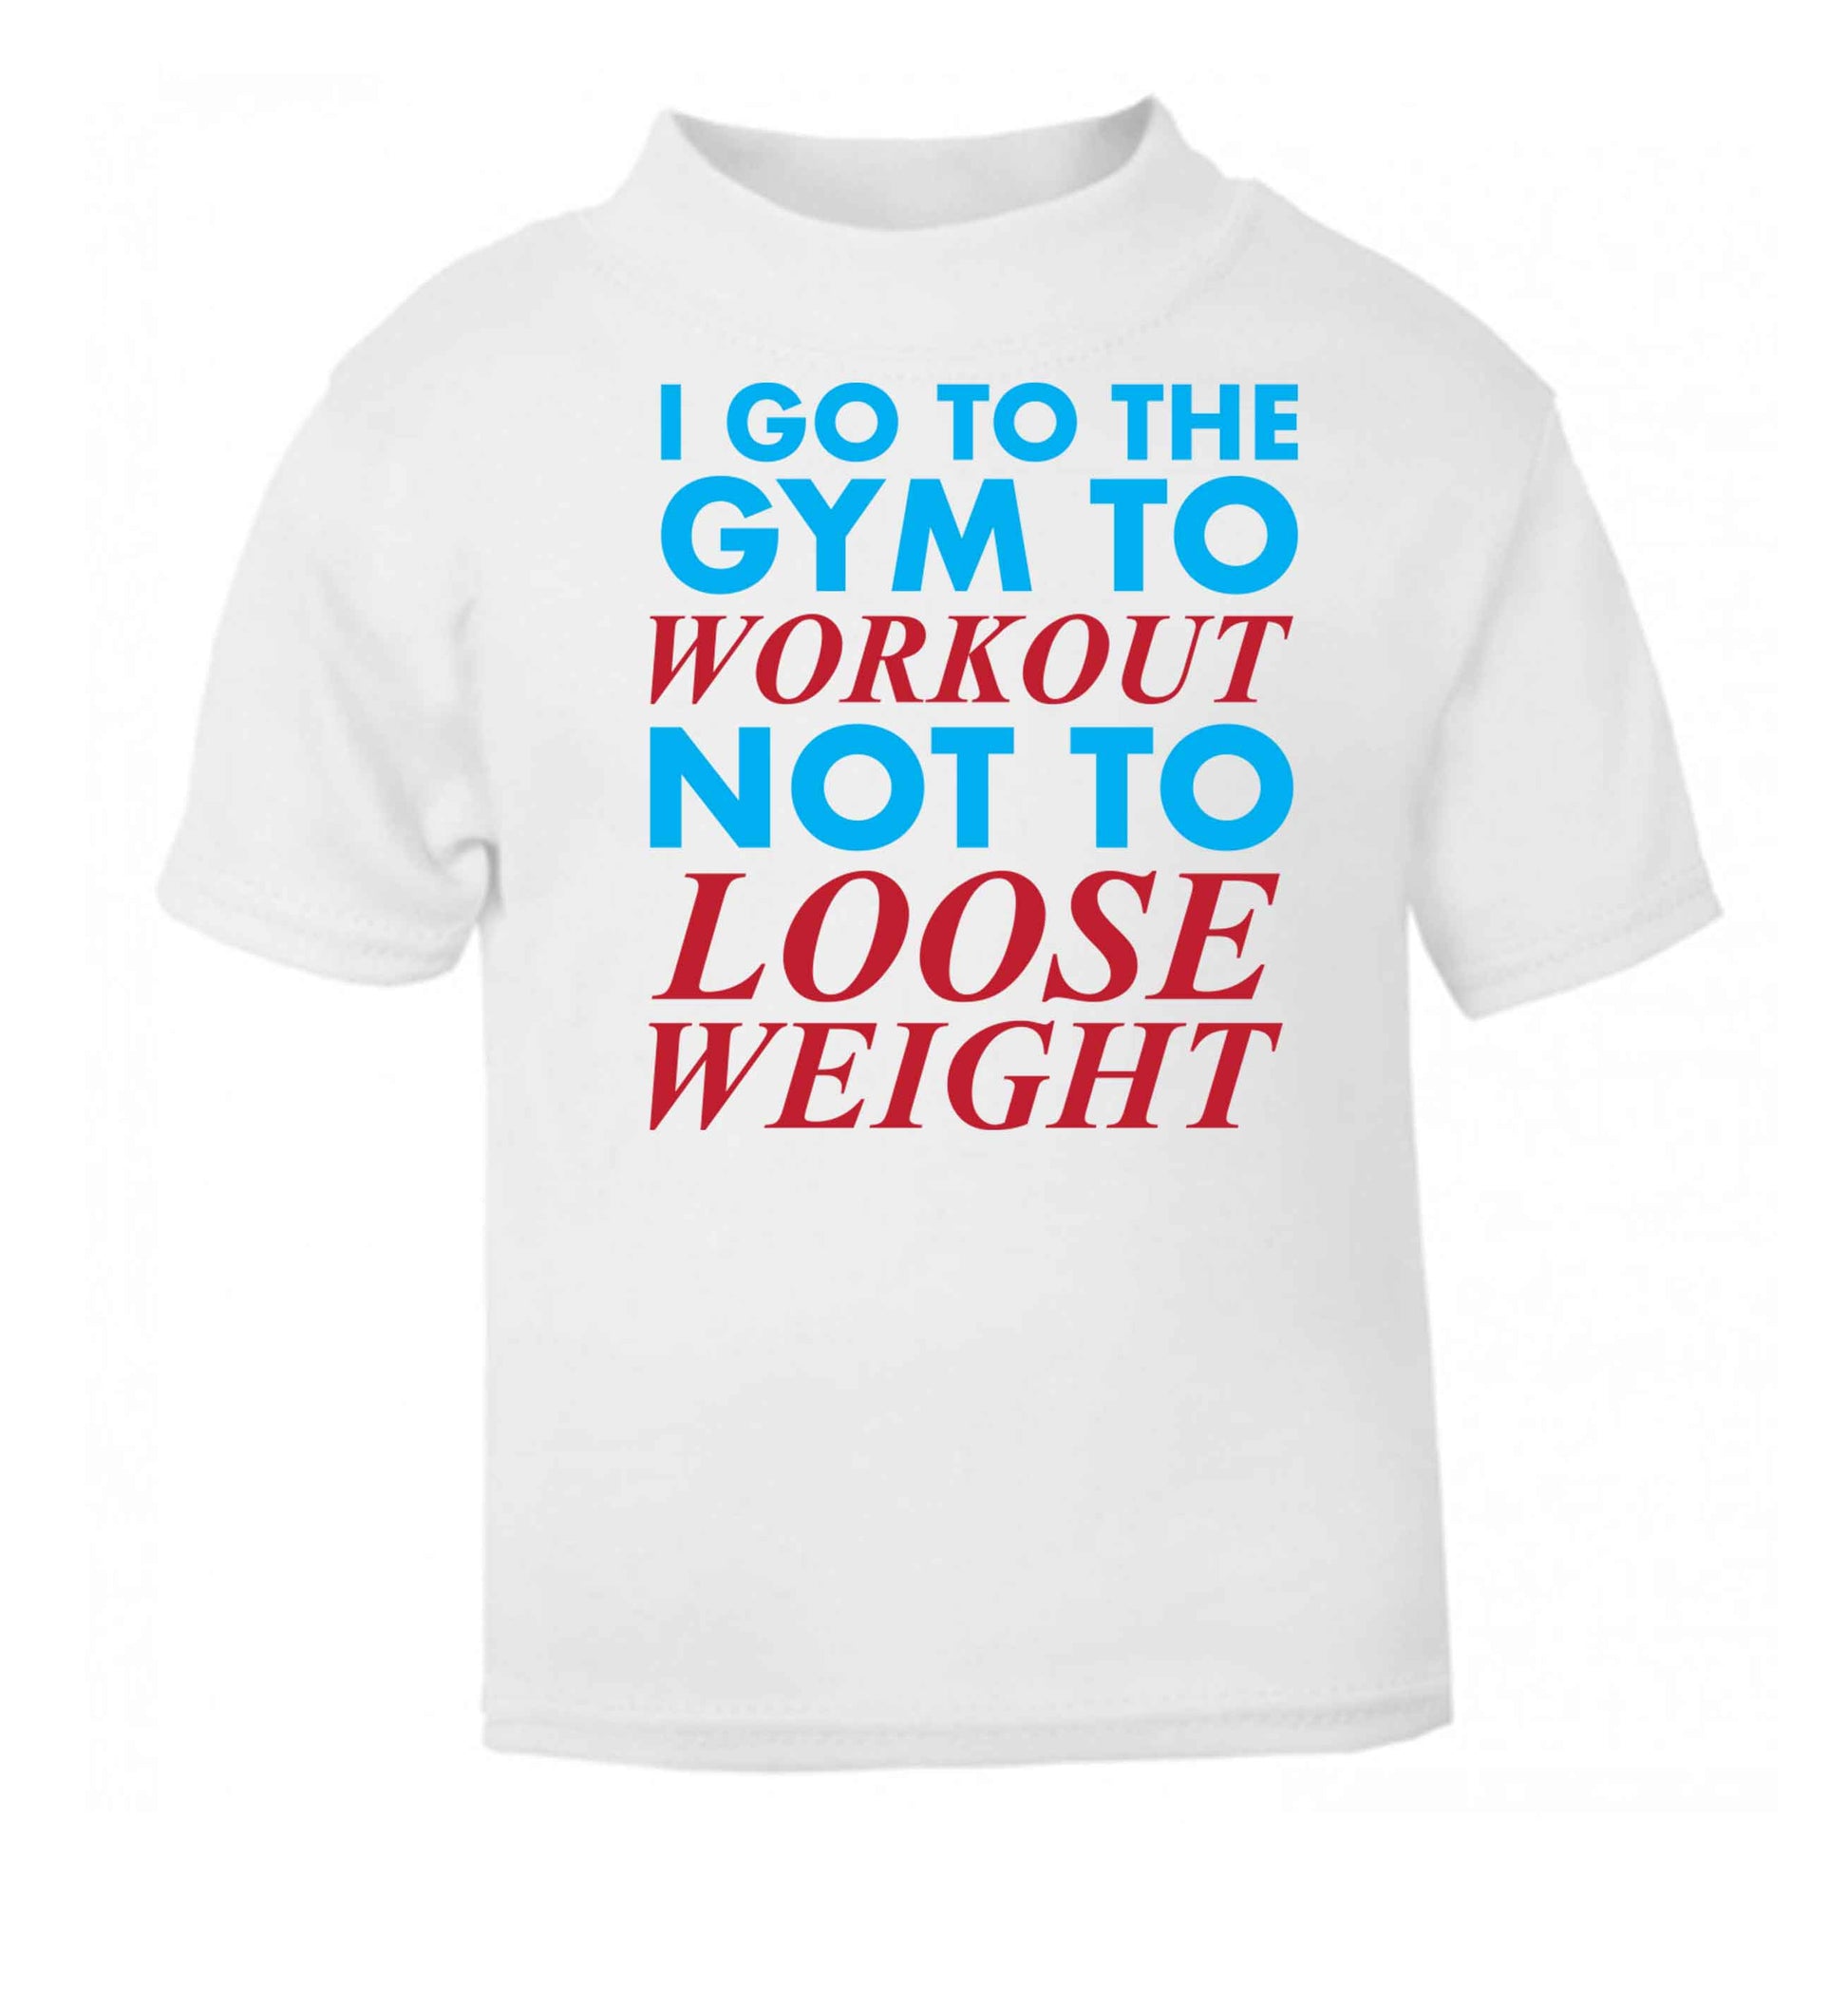 I go to the gym to workout not to loose weight white baby toddler Tshirt 2 Years